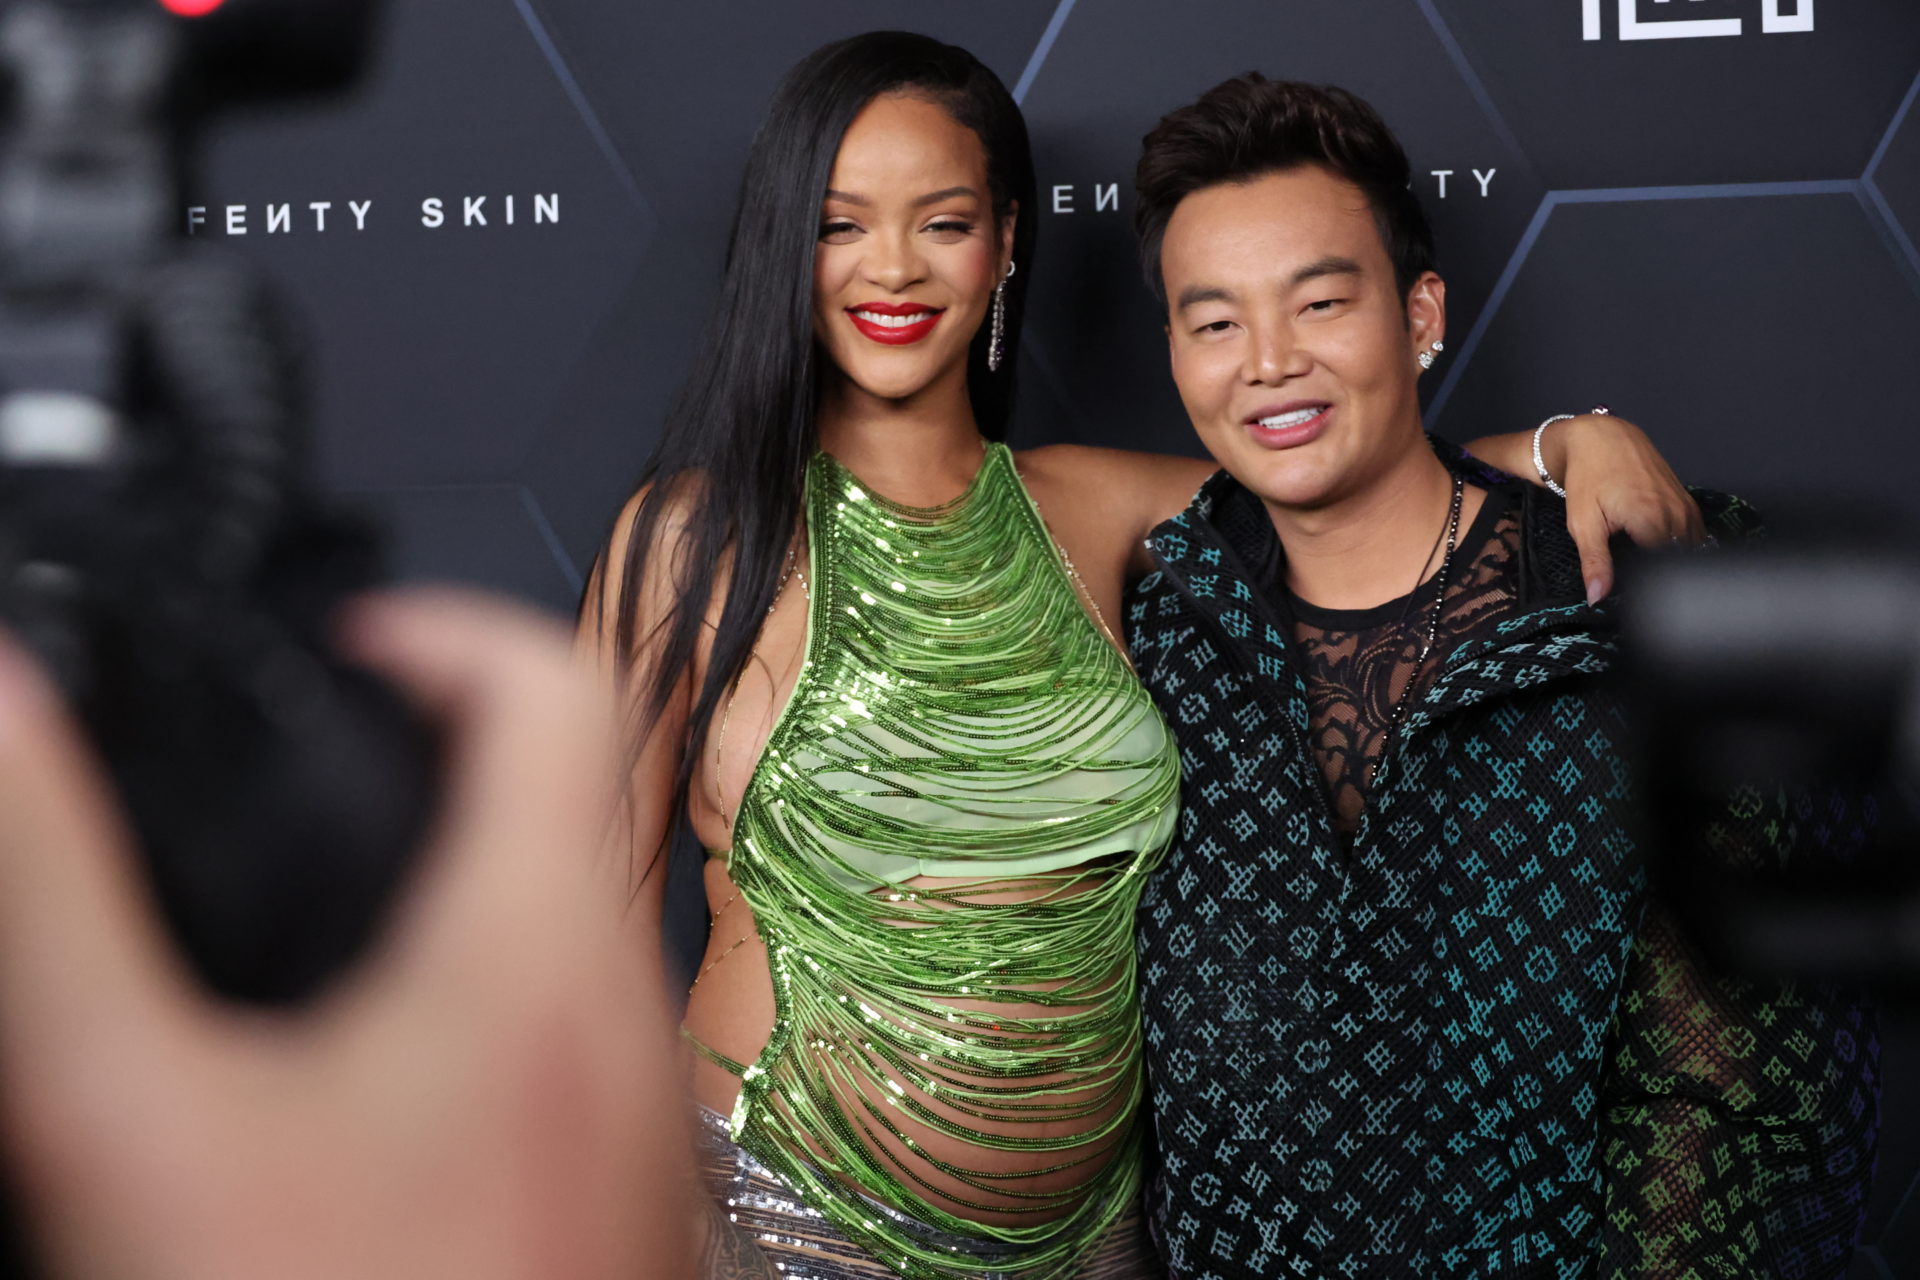 Bling Empire's Kane was hired by Fenty after years of friendship with Rihanna